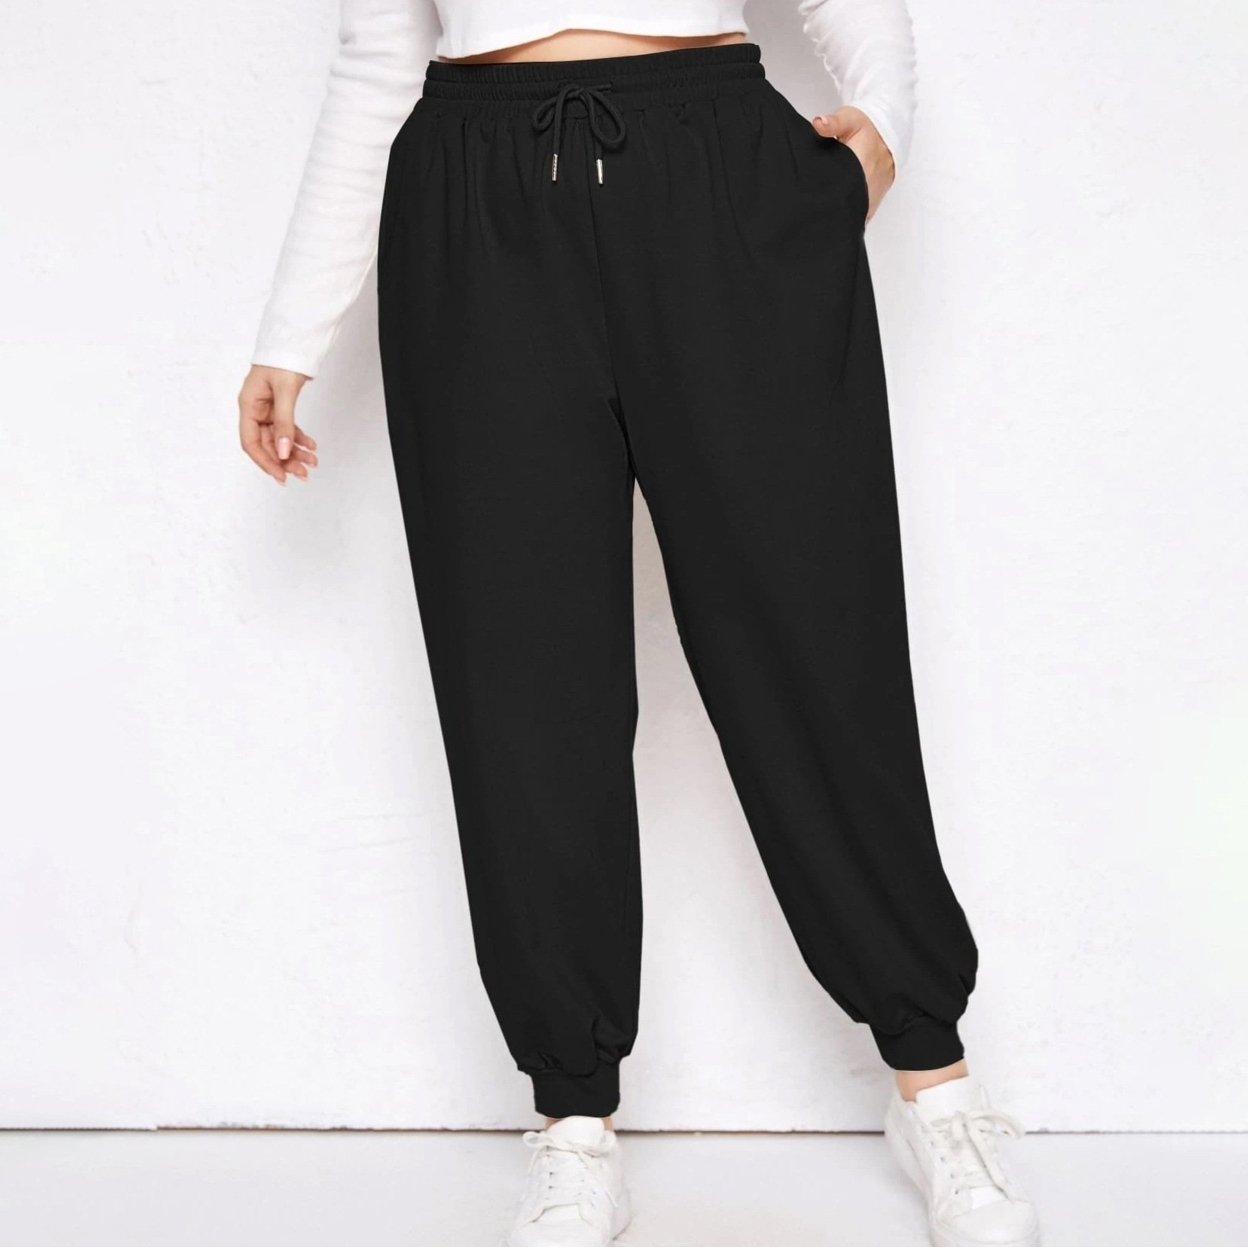 Fashion Casual Lace-up Solid Color Sports Pants Tie-leg Pants Loose Casual Trousers - Gray, Xl